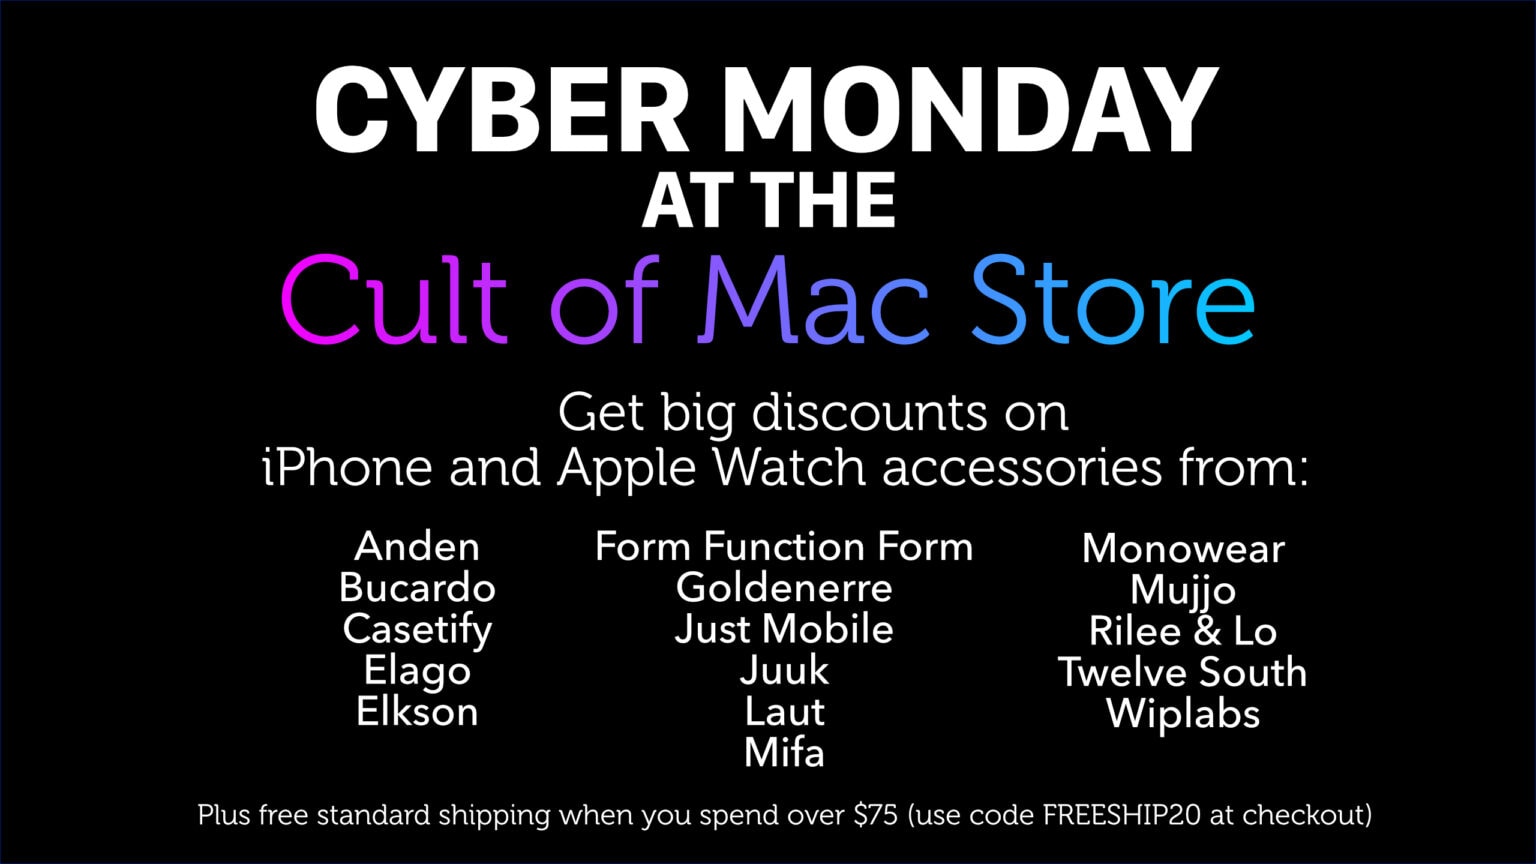 Cult of Mac Store Cyber Monday sale